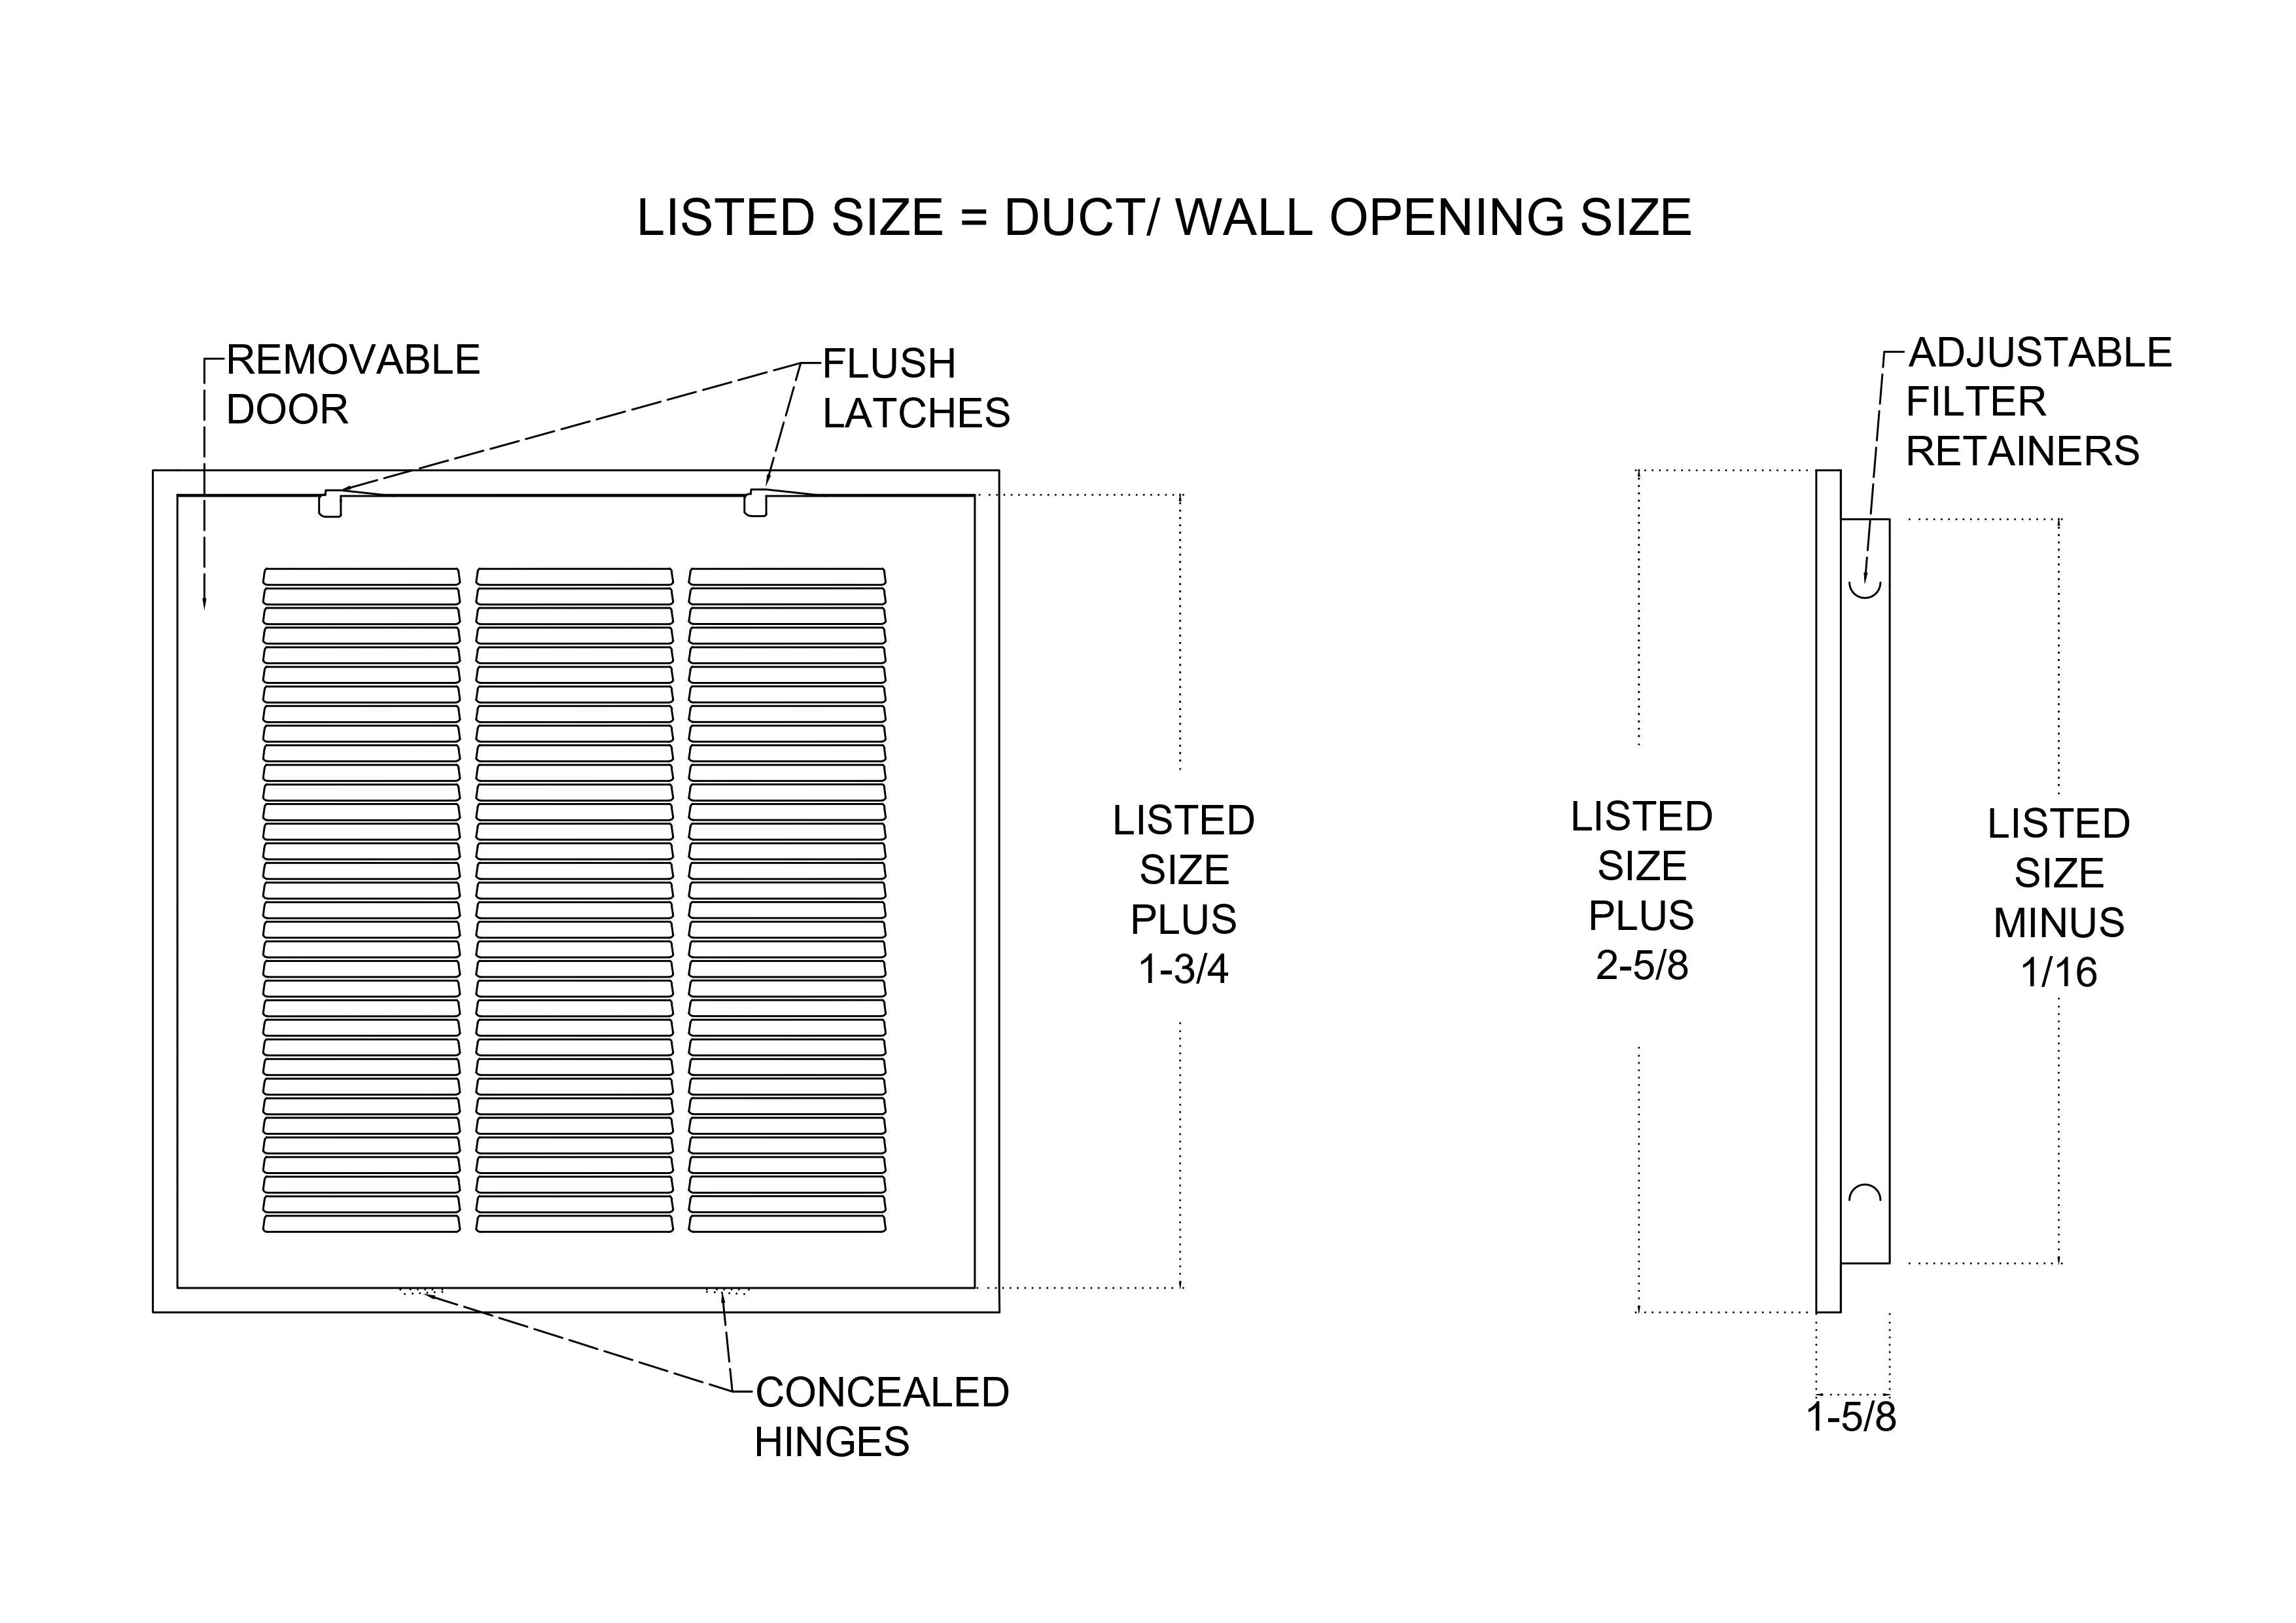 30" X 20" Duct Opening | Filter Included HD Steel Return Air Filter Grille for Sidewall and Ceiling